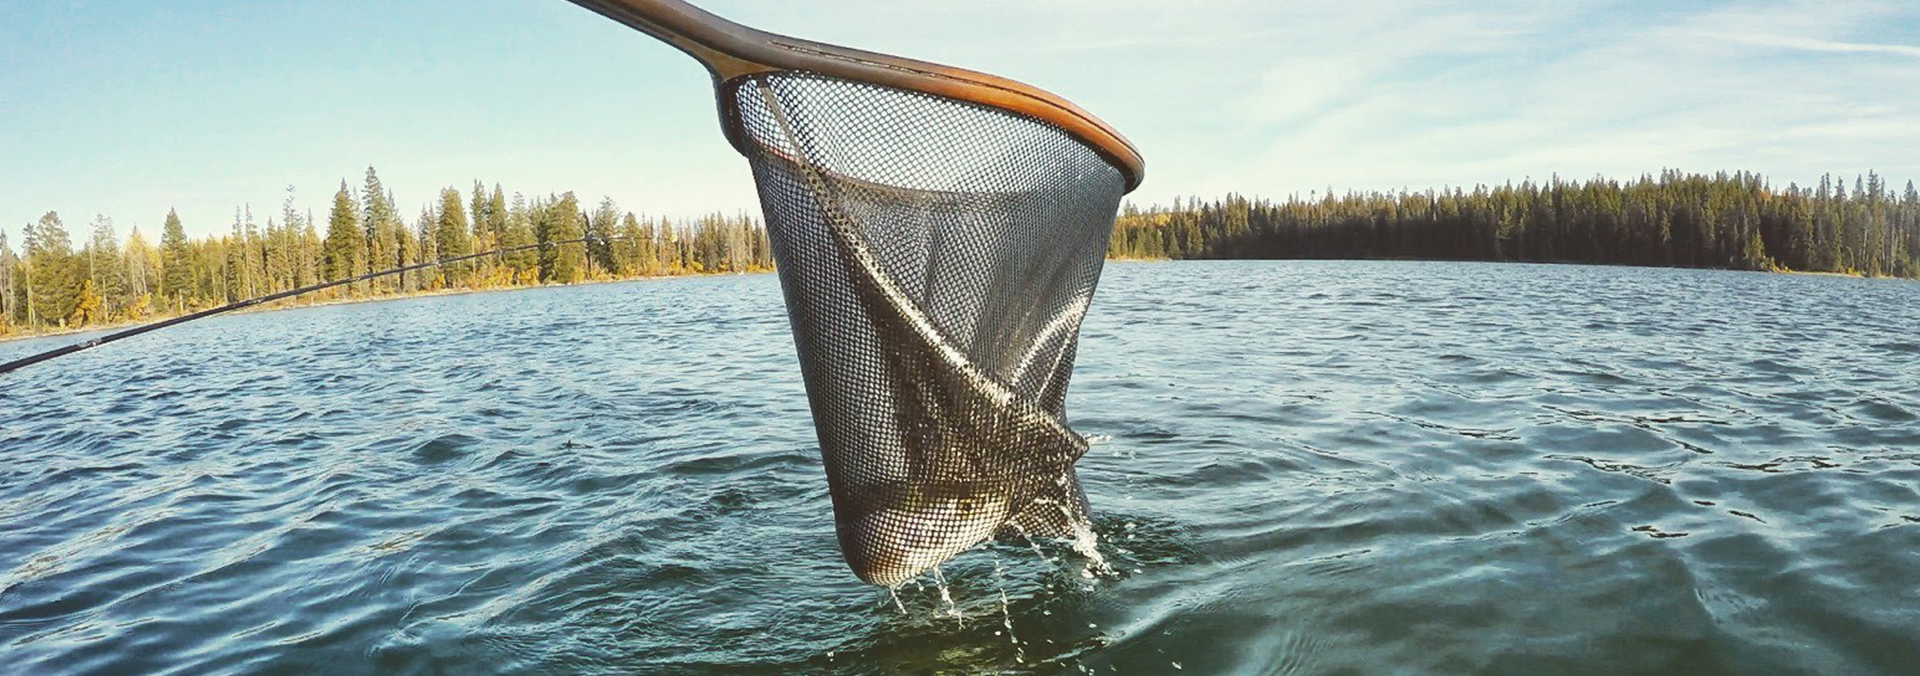 Shrimp (Scuds): Fly Fishing Tactics - Freshwater Fisheries Society of BC